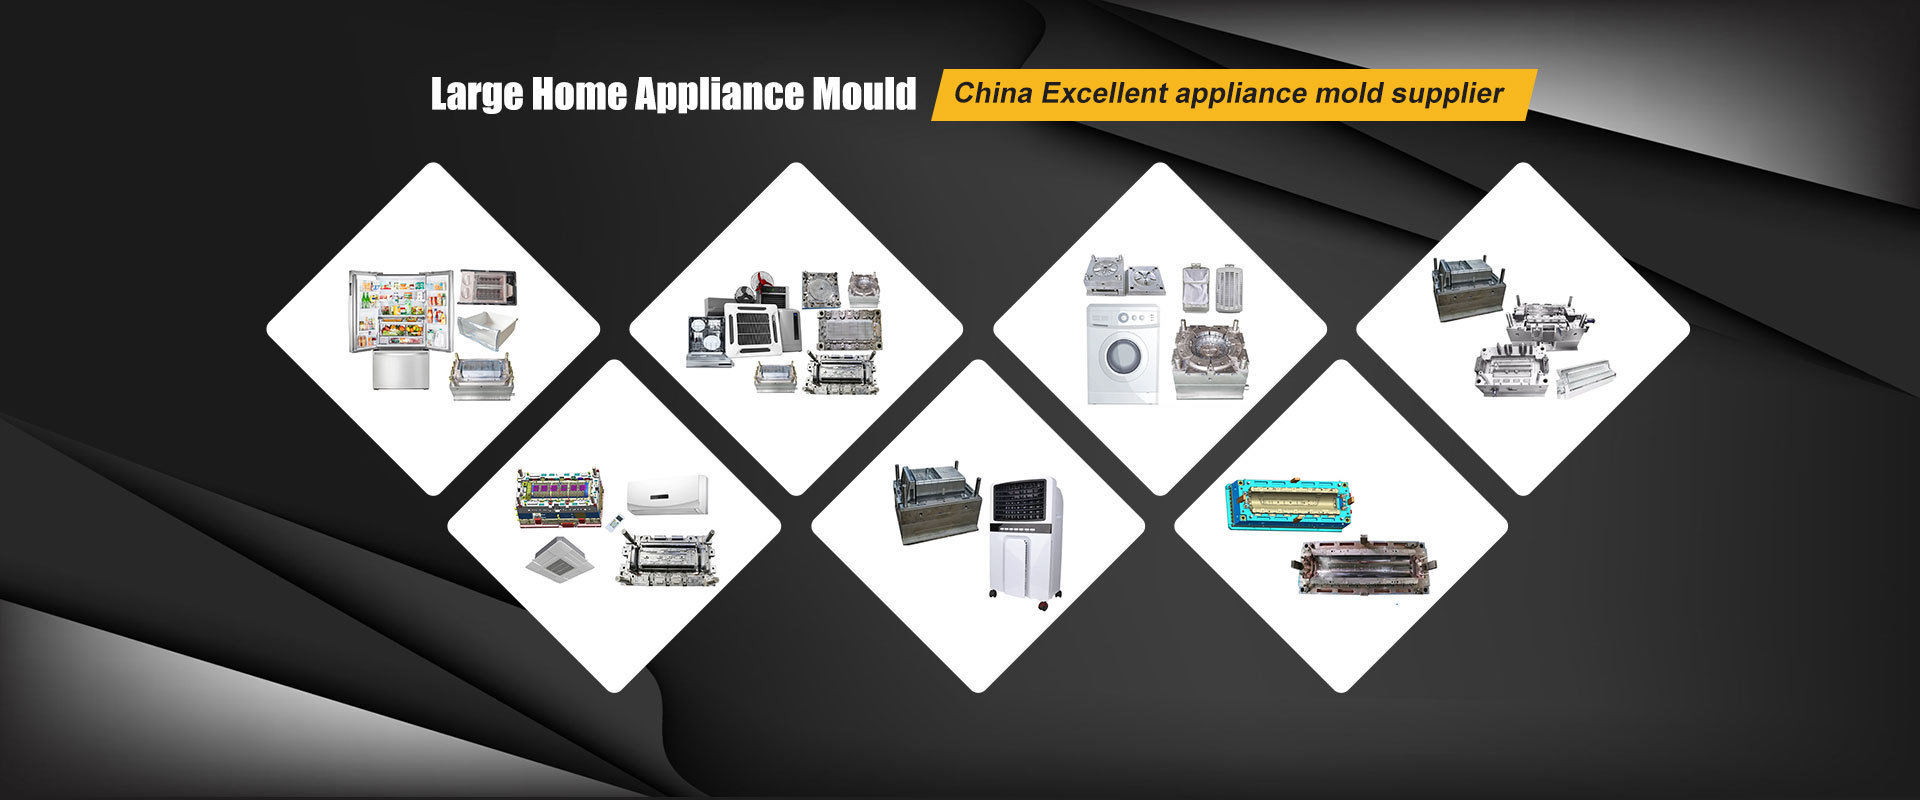 China Large Home Appliance Mould